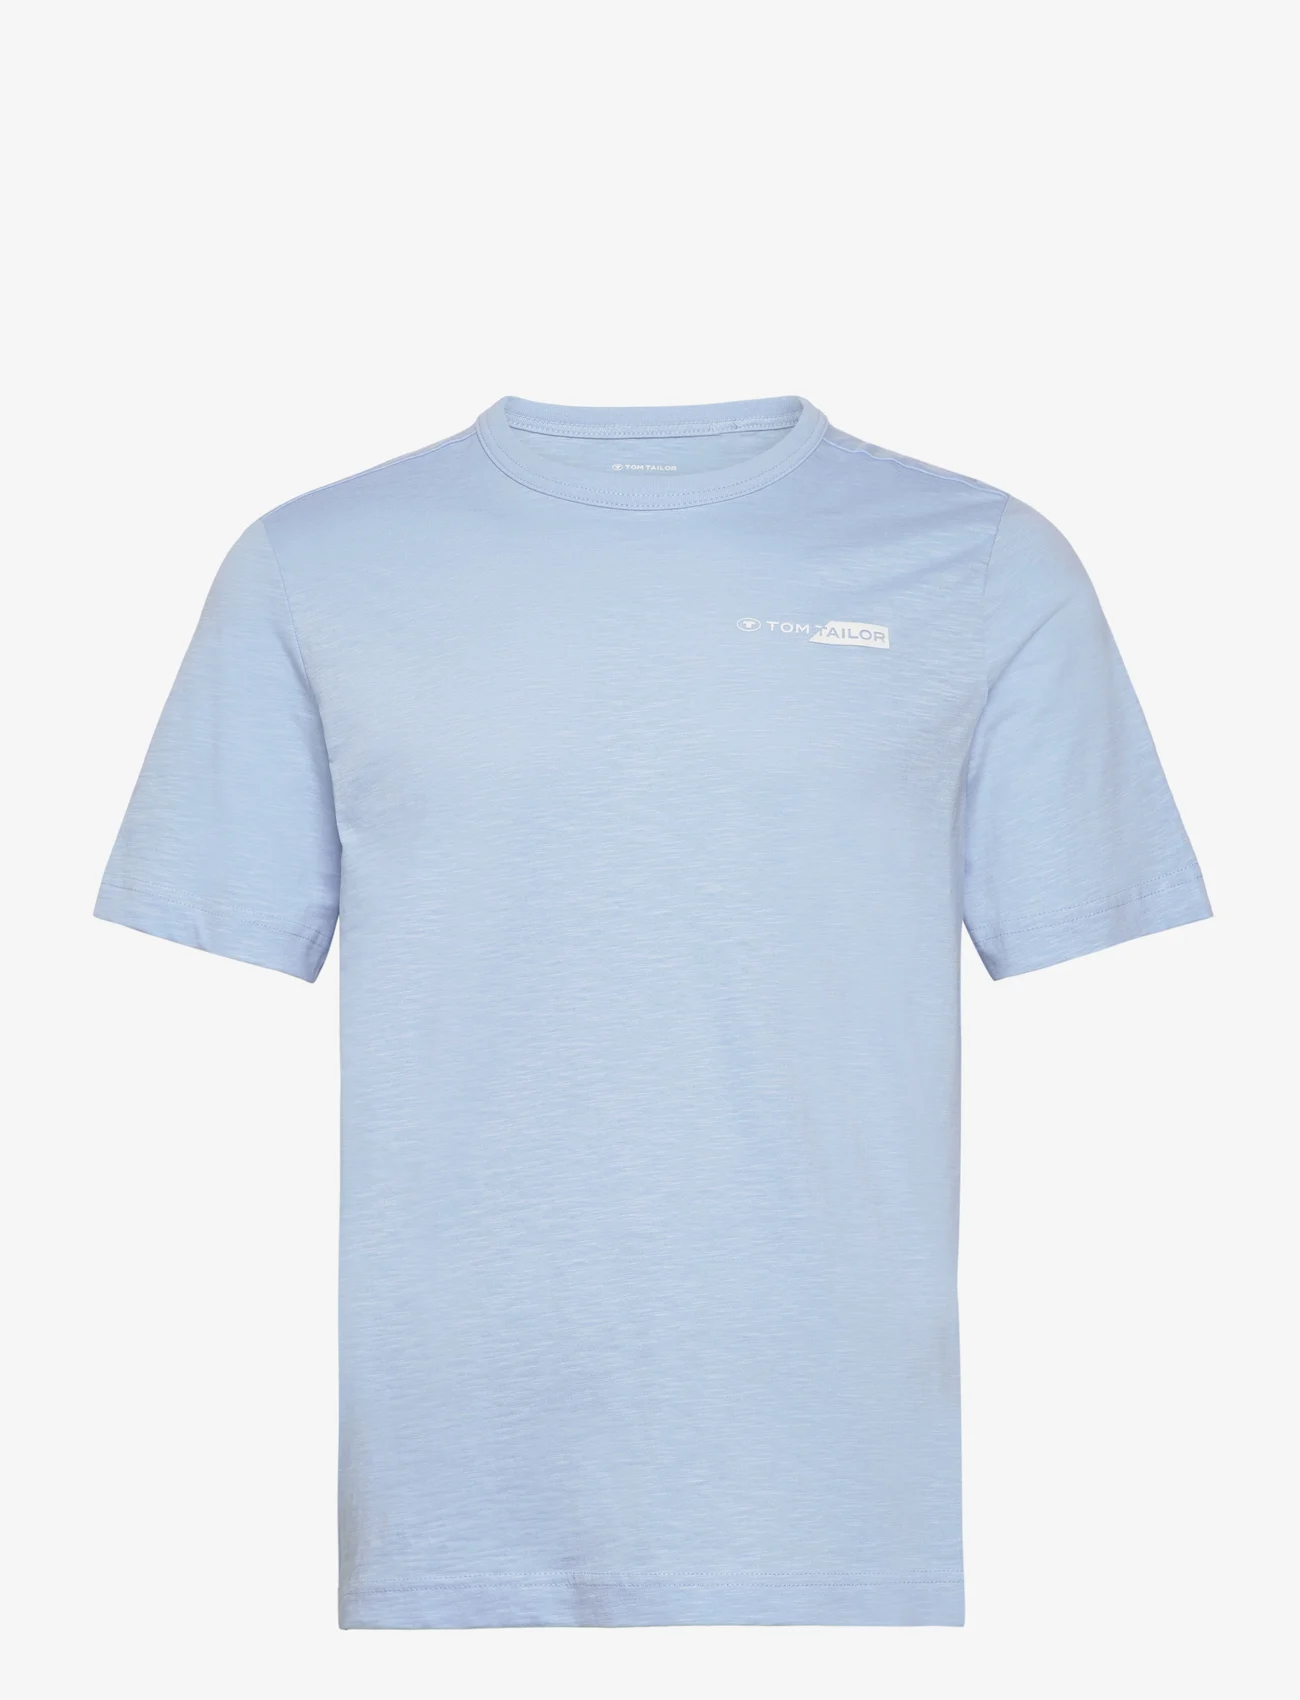 Tom Tailor - printed t-shirt - mažiausios kainos - washed out middle blue - 0